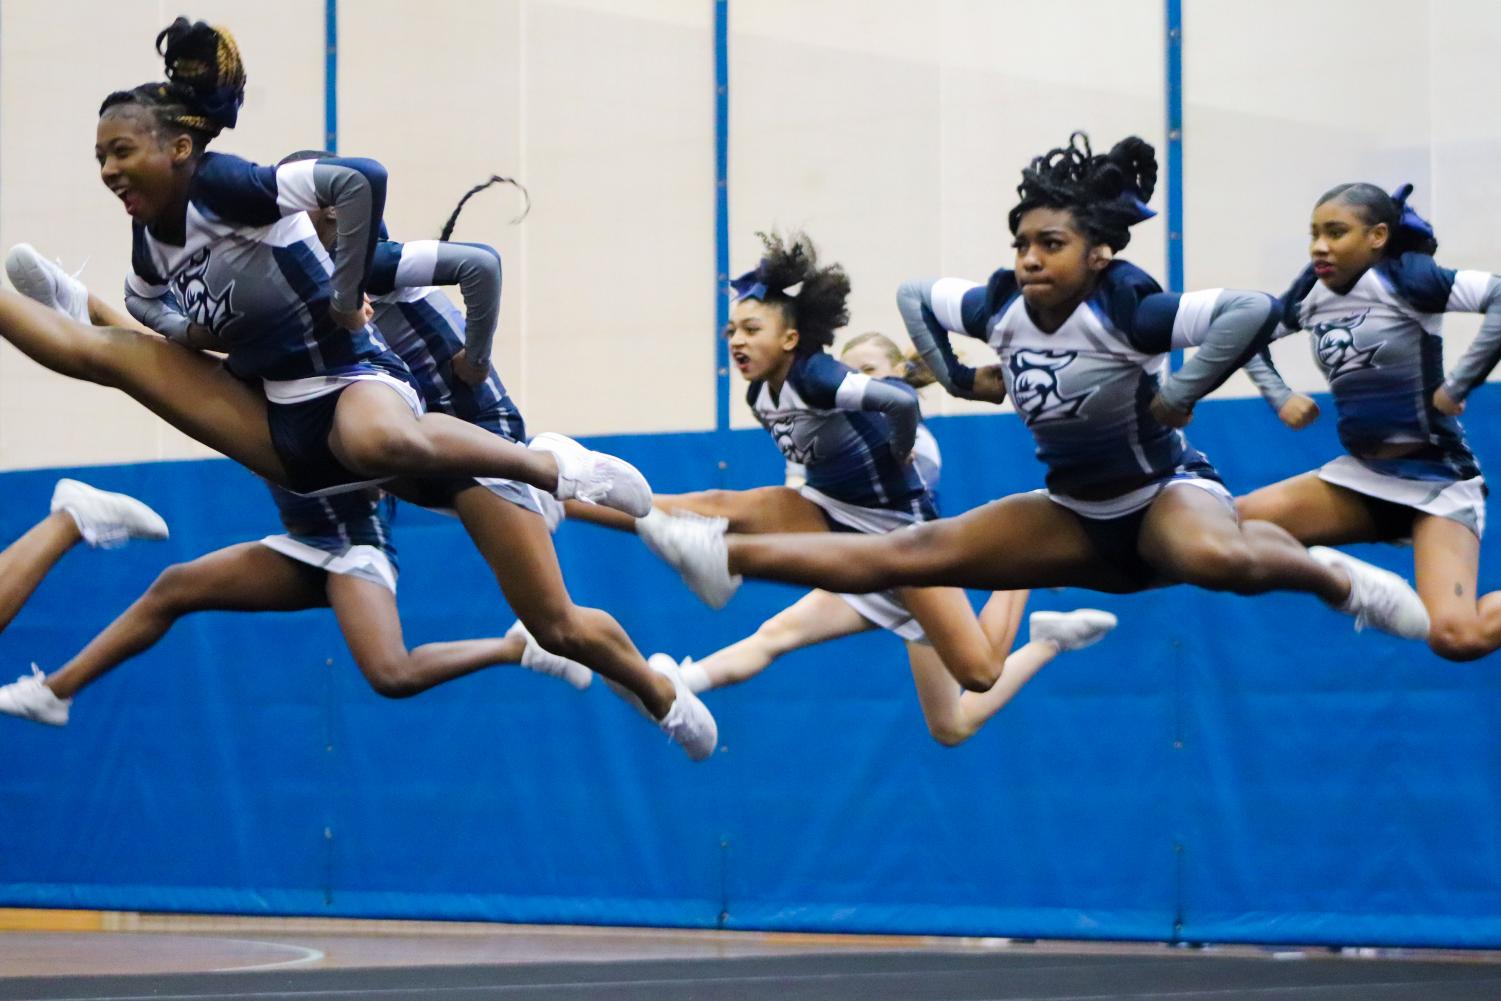 Cheer Jumps - How To Jump Higher